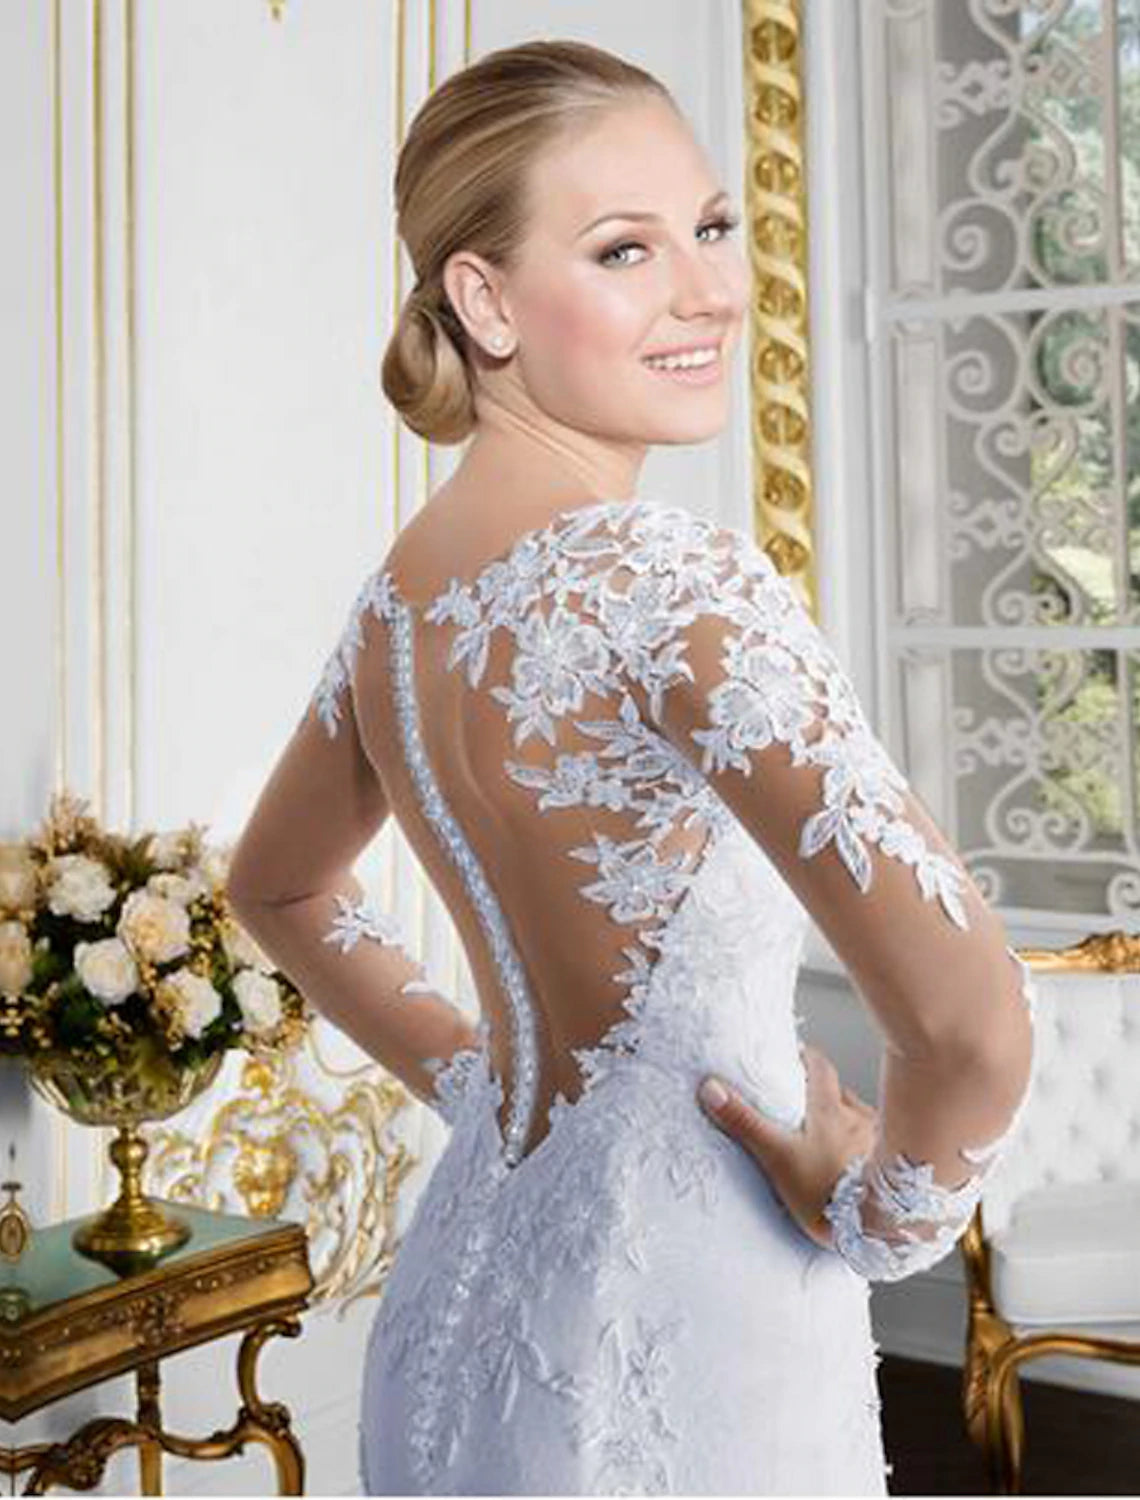 Open Back Sexy Formal Fall Wedding Dresses Mermaid / Trumpet Illusion Neck Long Sleeve Chapel Train Lace Bridal Gowns With Lace Appliques 2023 Summer Wedding Party